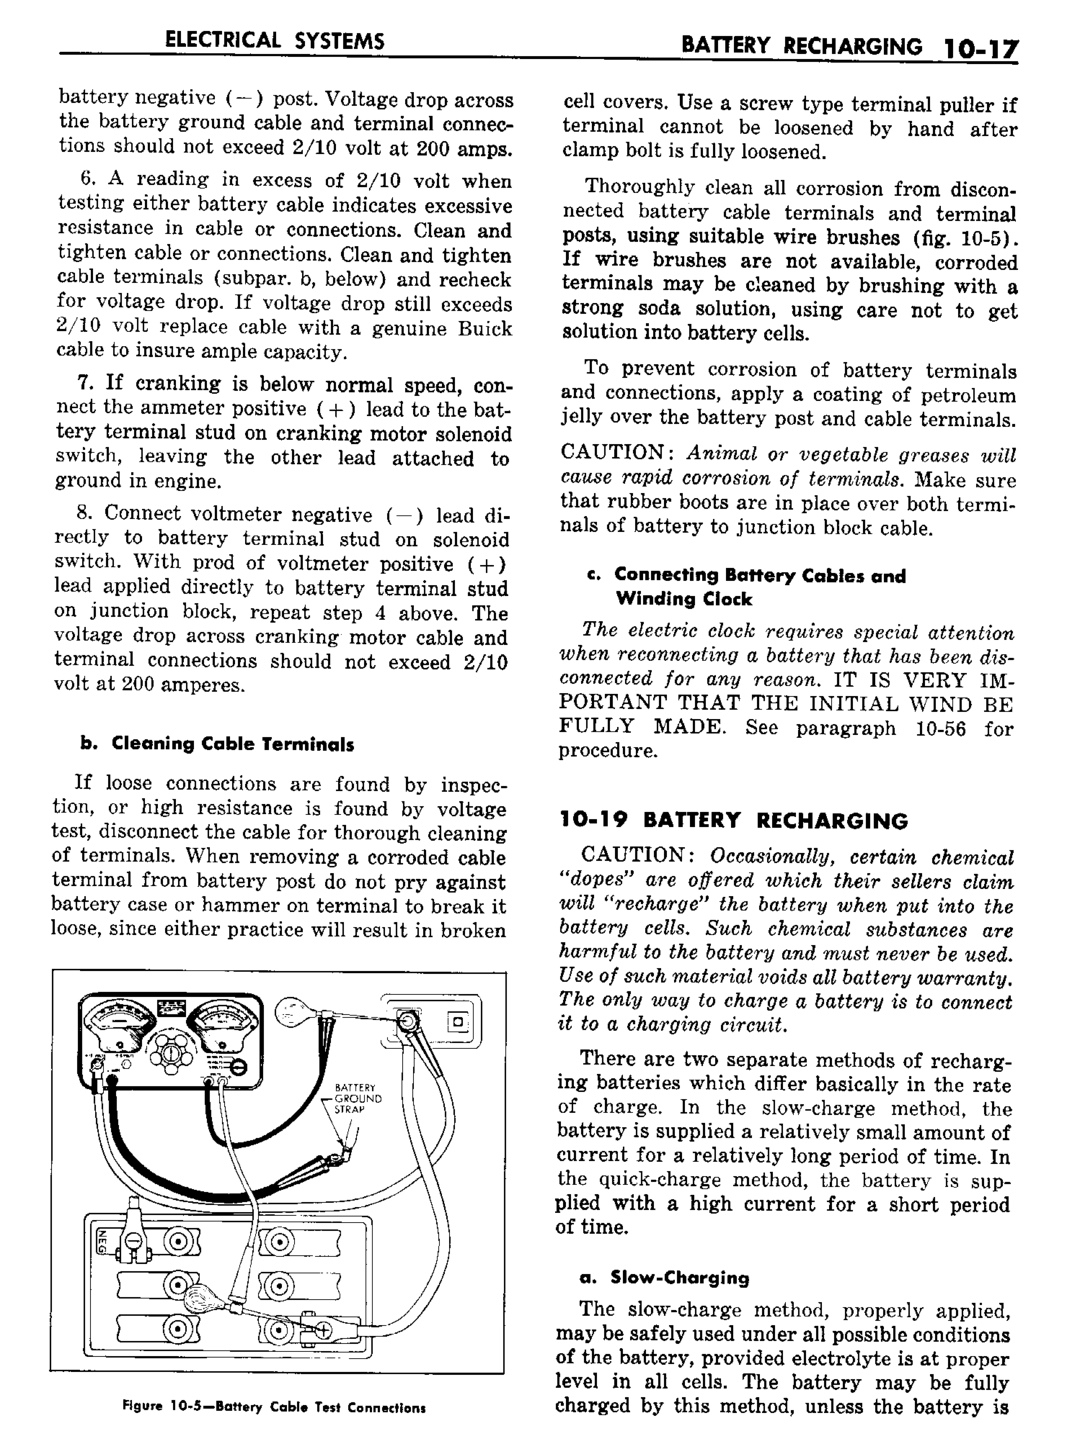 n_11 1960 Buick Shop Manual - Electrical Systems-017-017.jpg